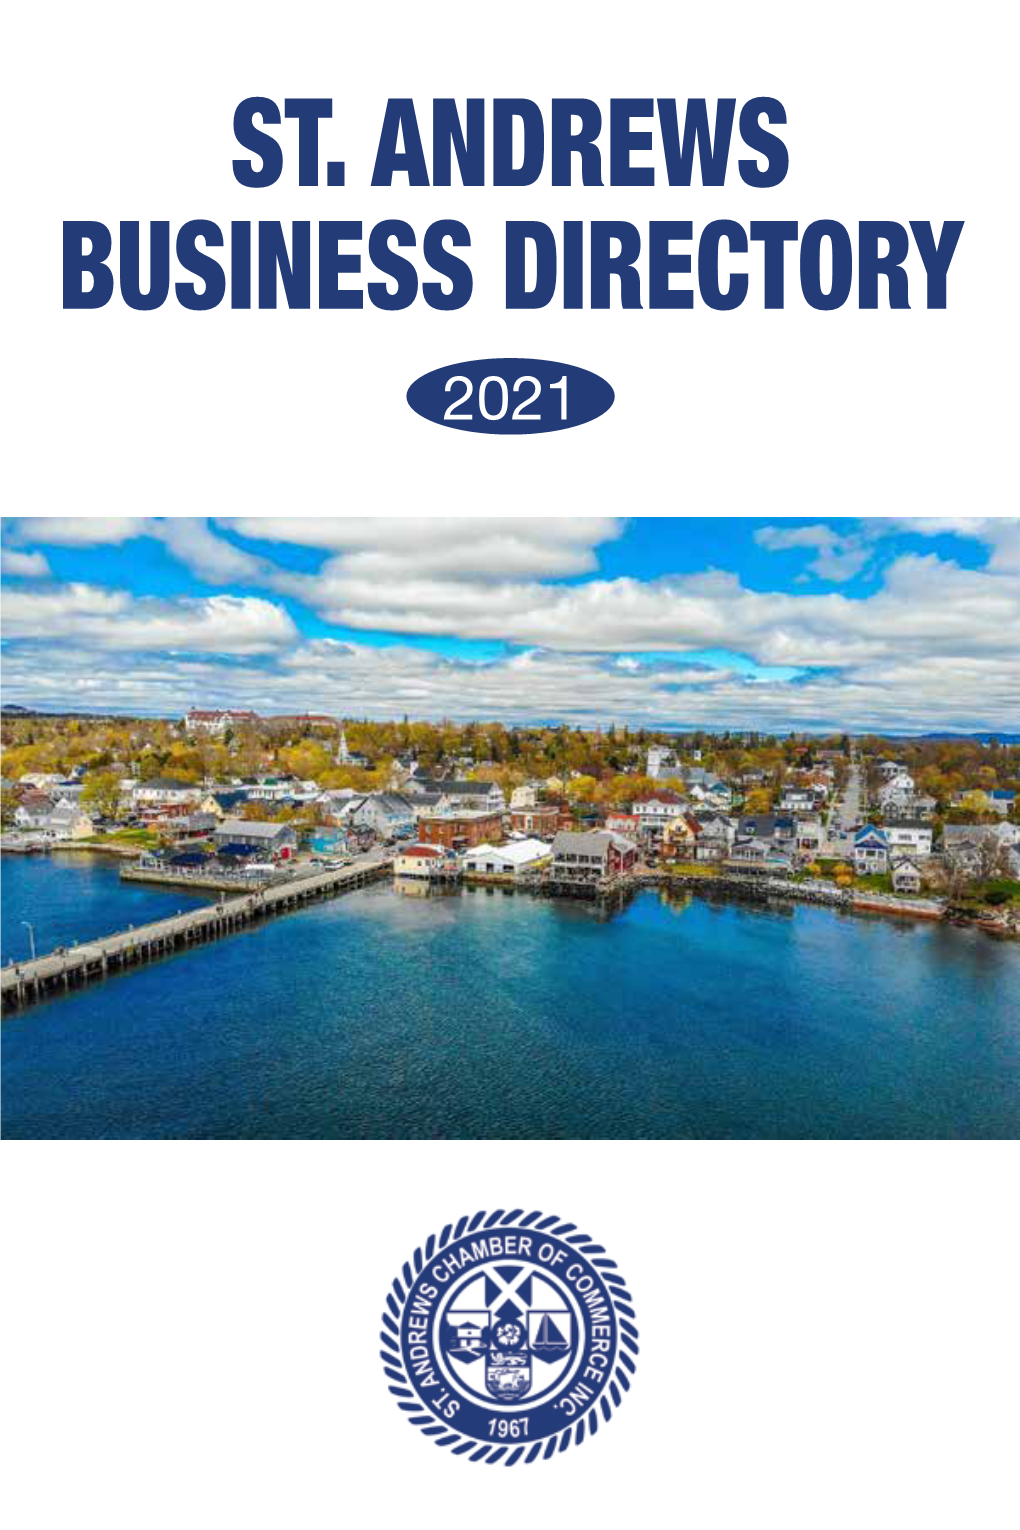 Business Directory St. Andrews